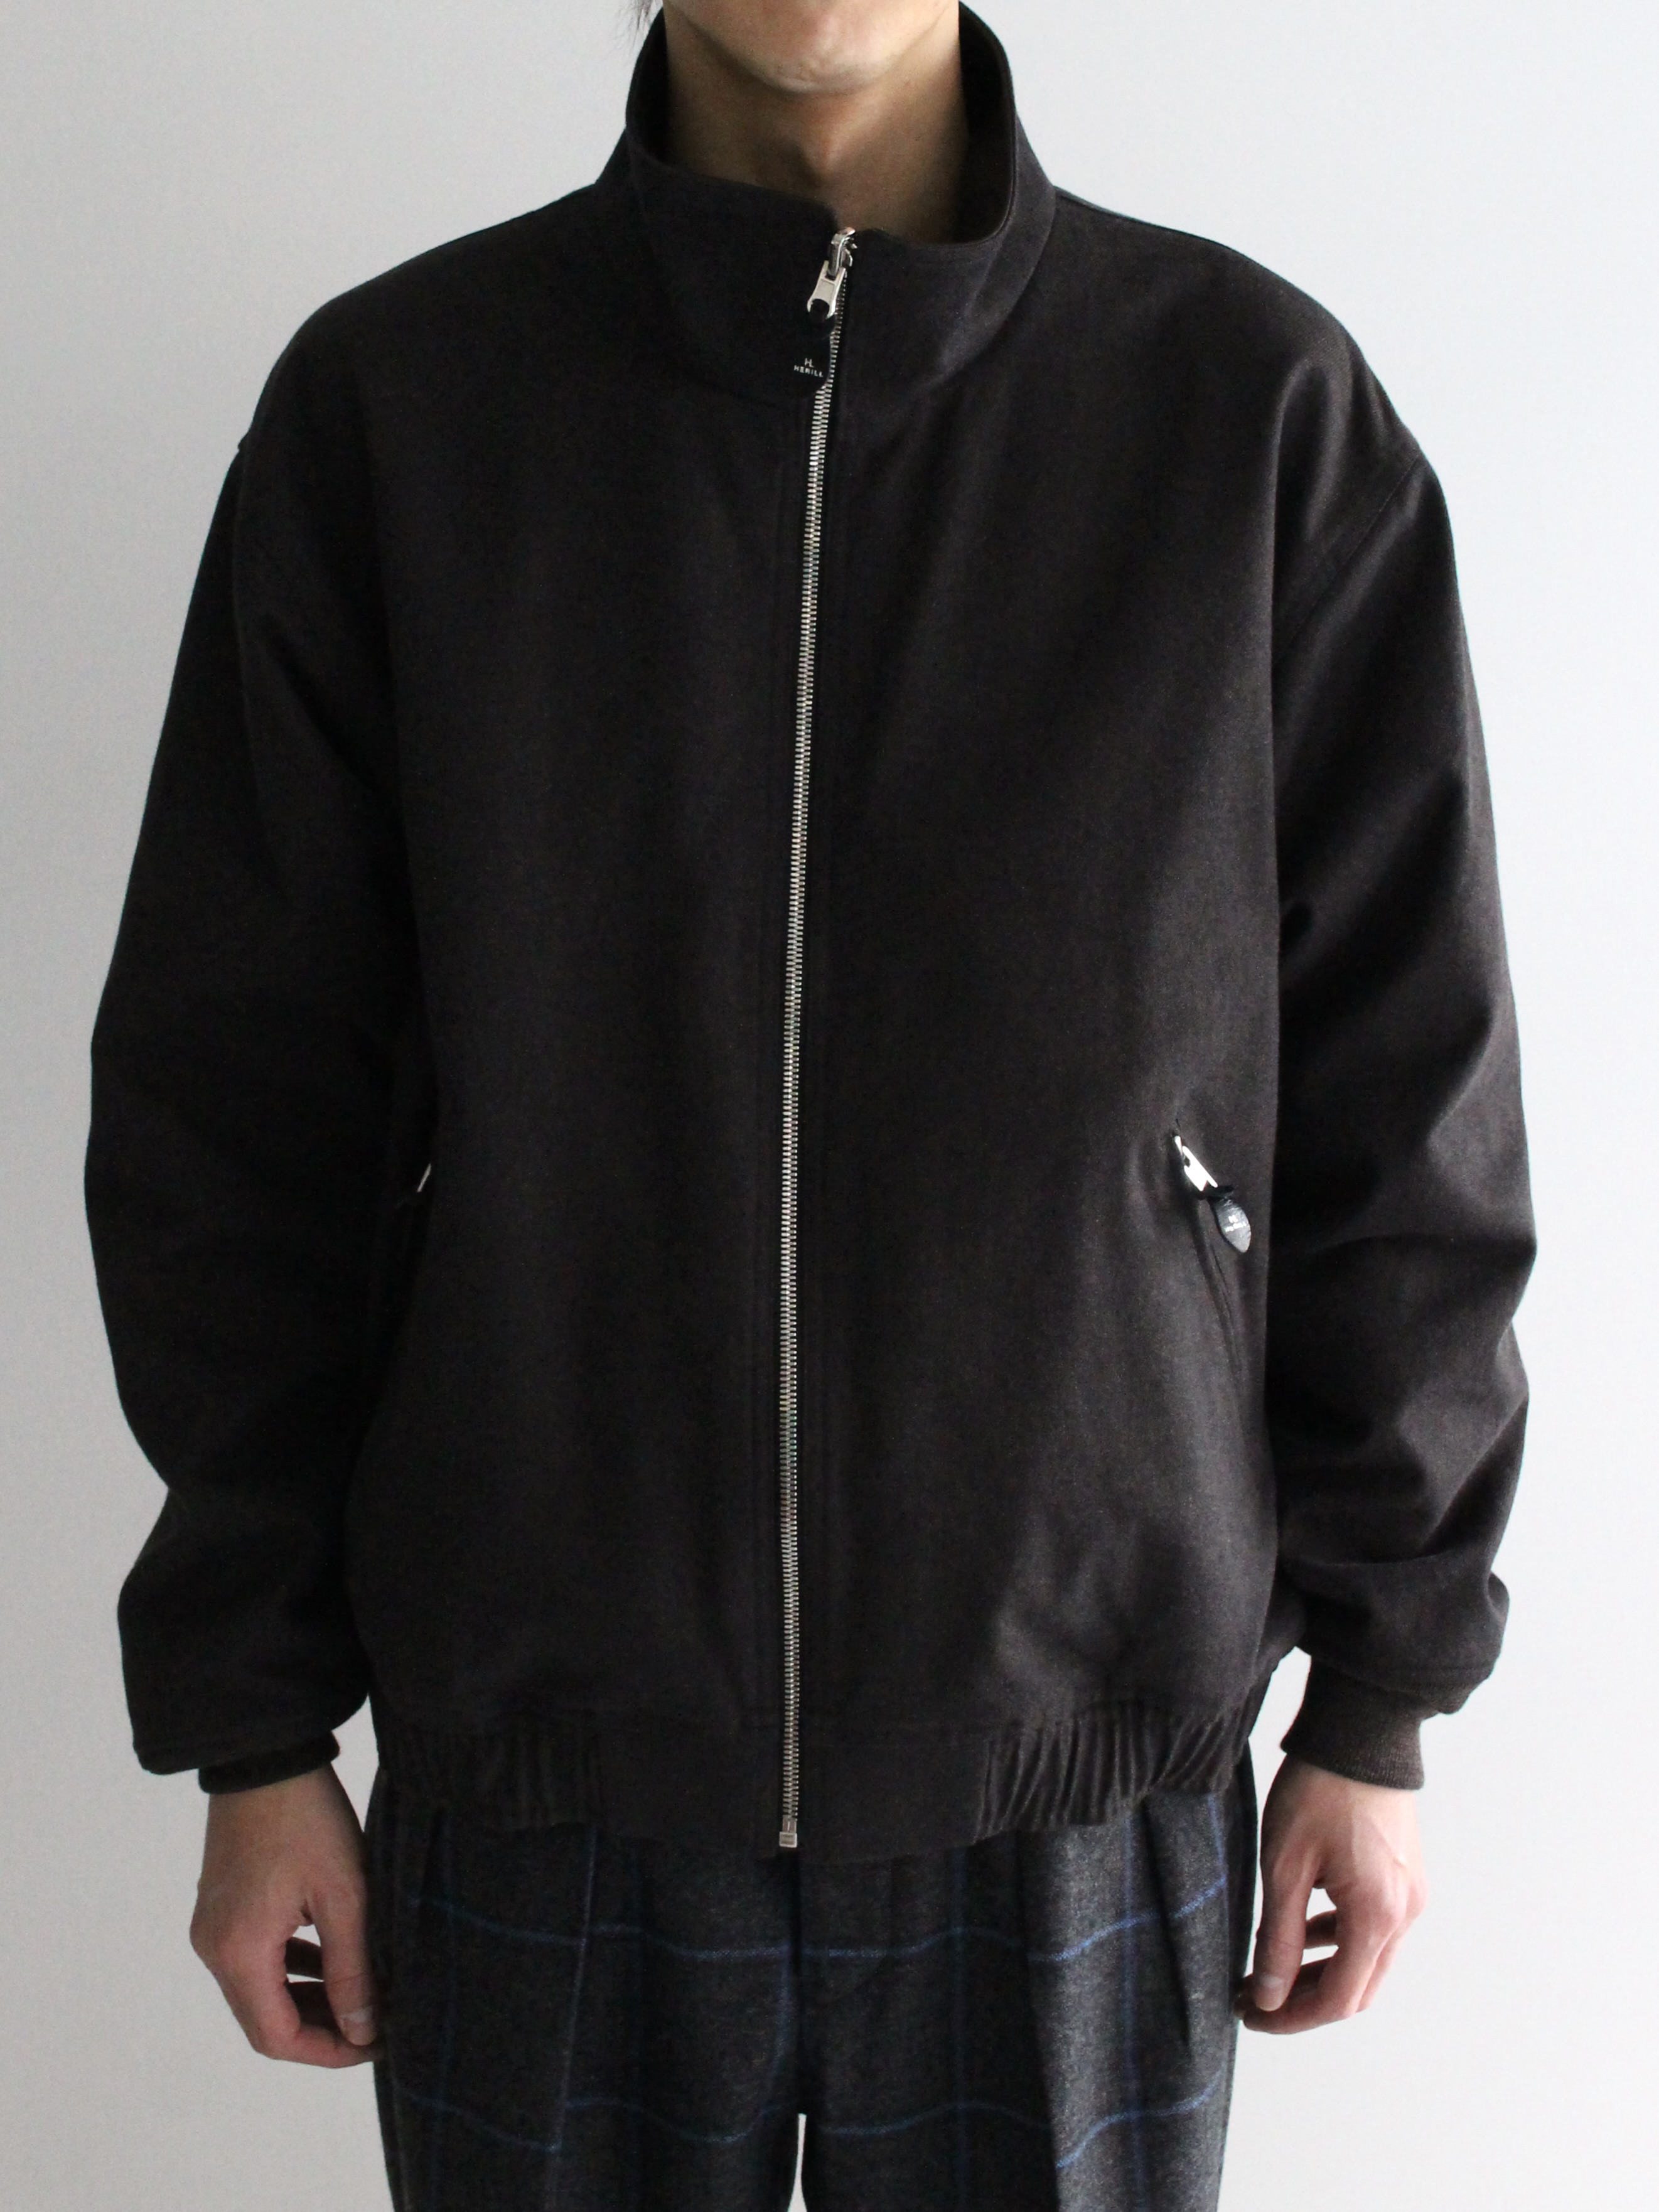 HERILL 23AW Cottontwill Weekend Jacket 2ウイークエンドジャケット ...